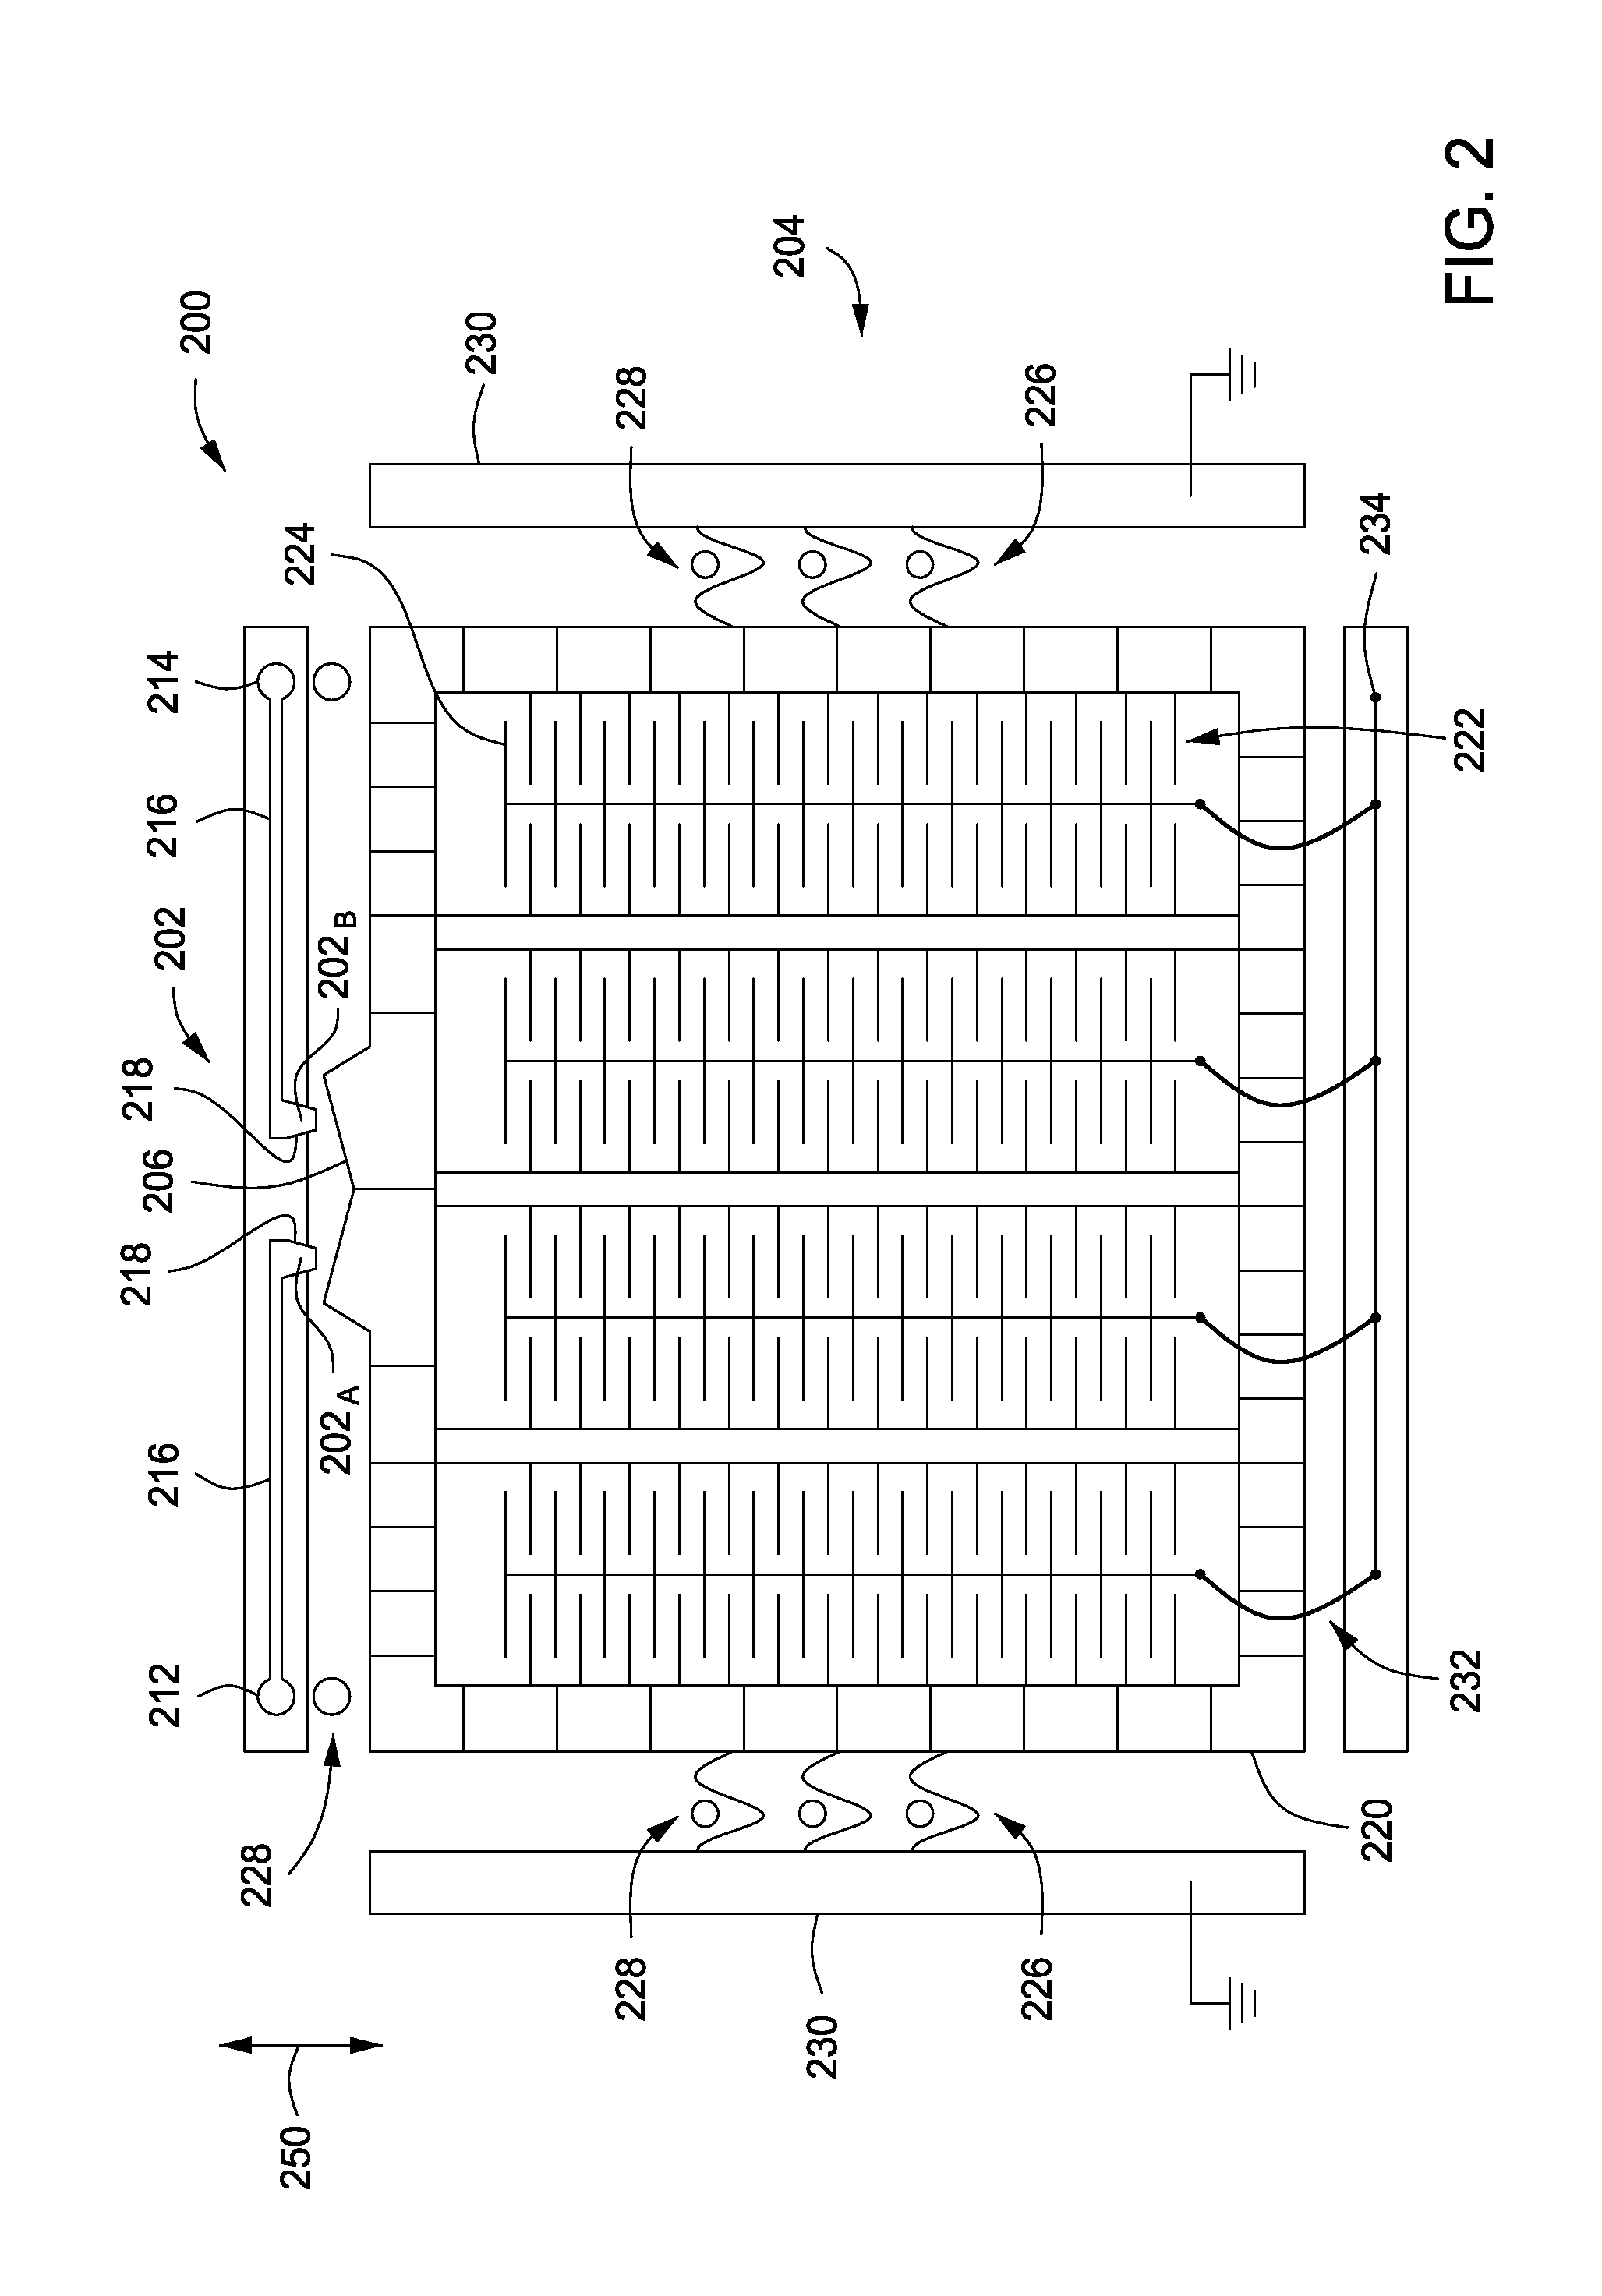 Switch for use in microelectromechanical systems (MEMS) and MEMS devices incorporating same